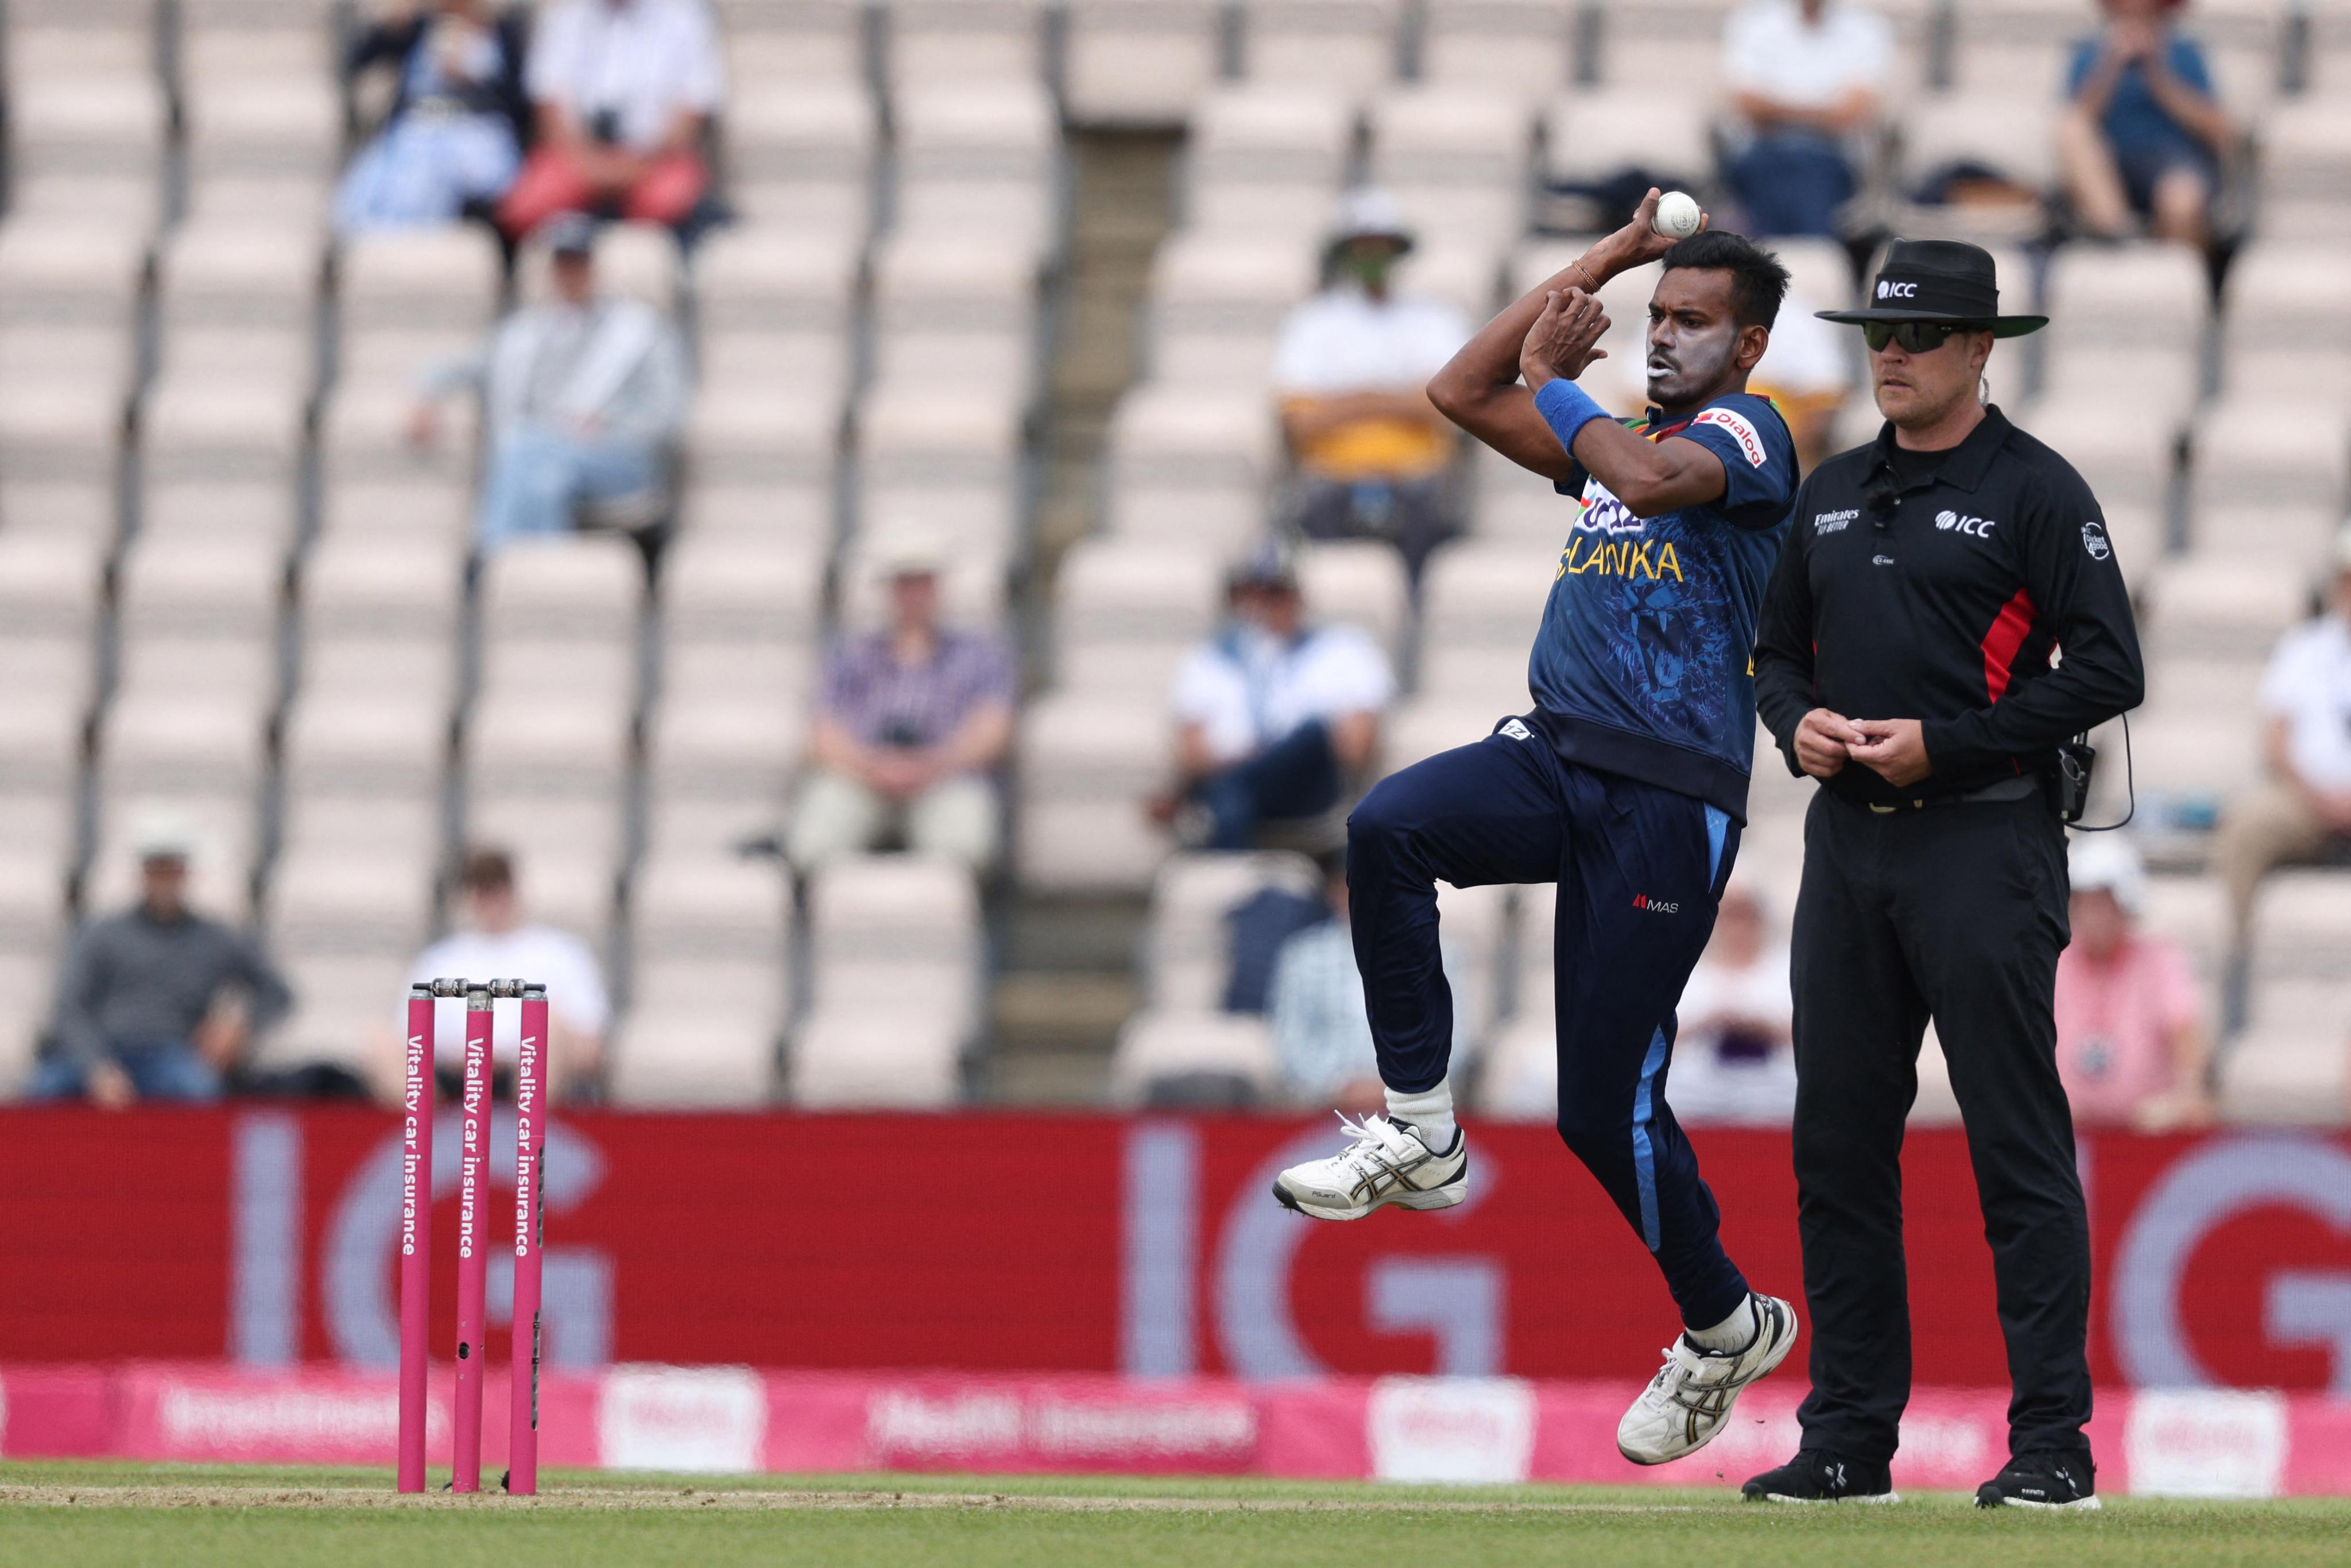 Takeaways for Sri Lanka from the England T20Is ft. Chameera's x-factor and Hasaranga's untapped potential